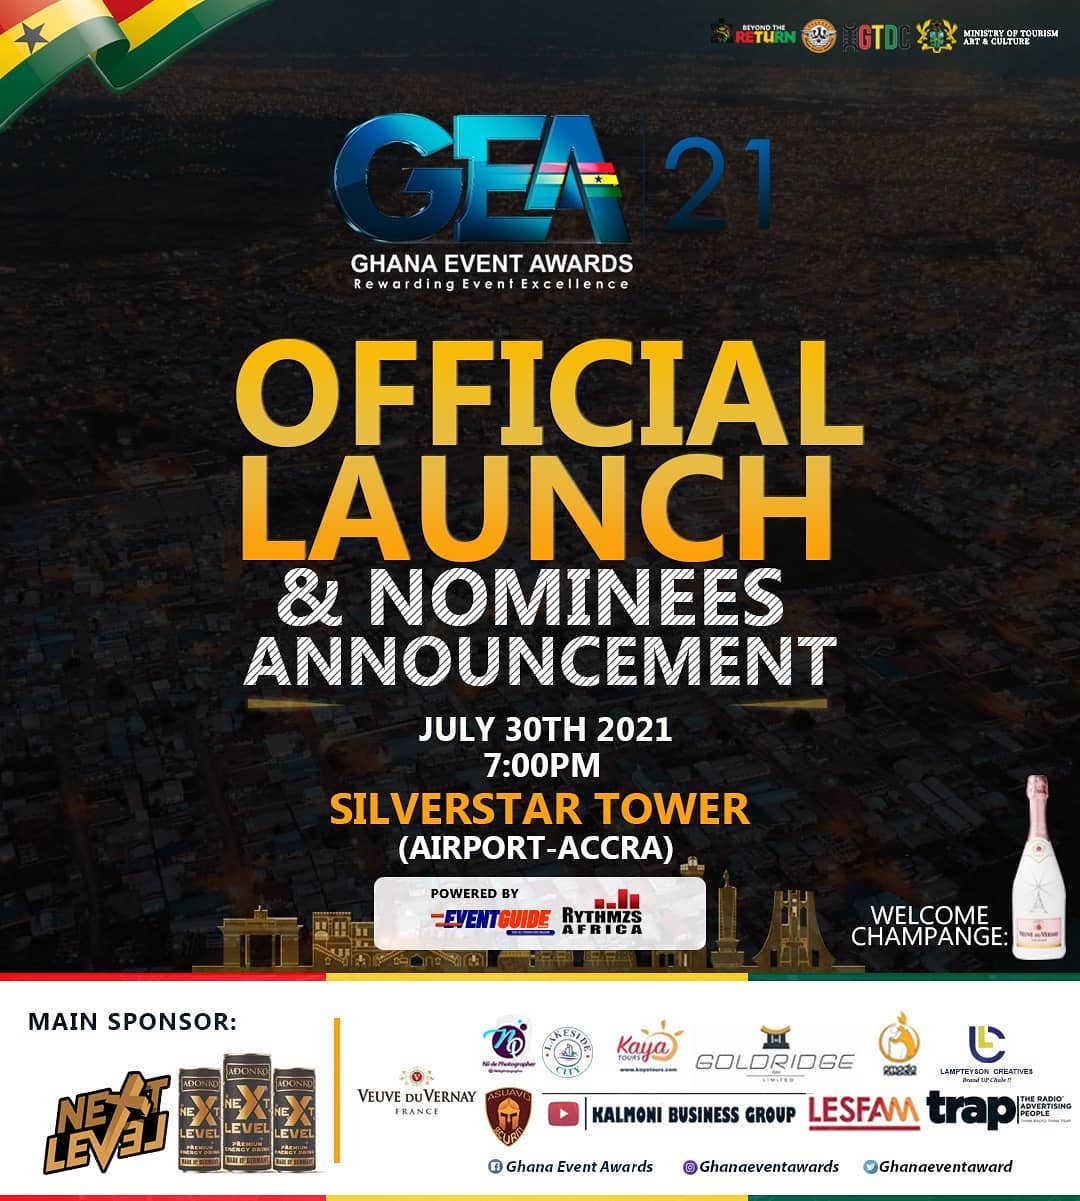 Ghana Event Awards 2021 to be Officially Launched in Accra